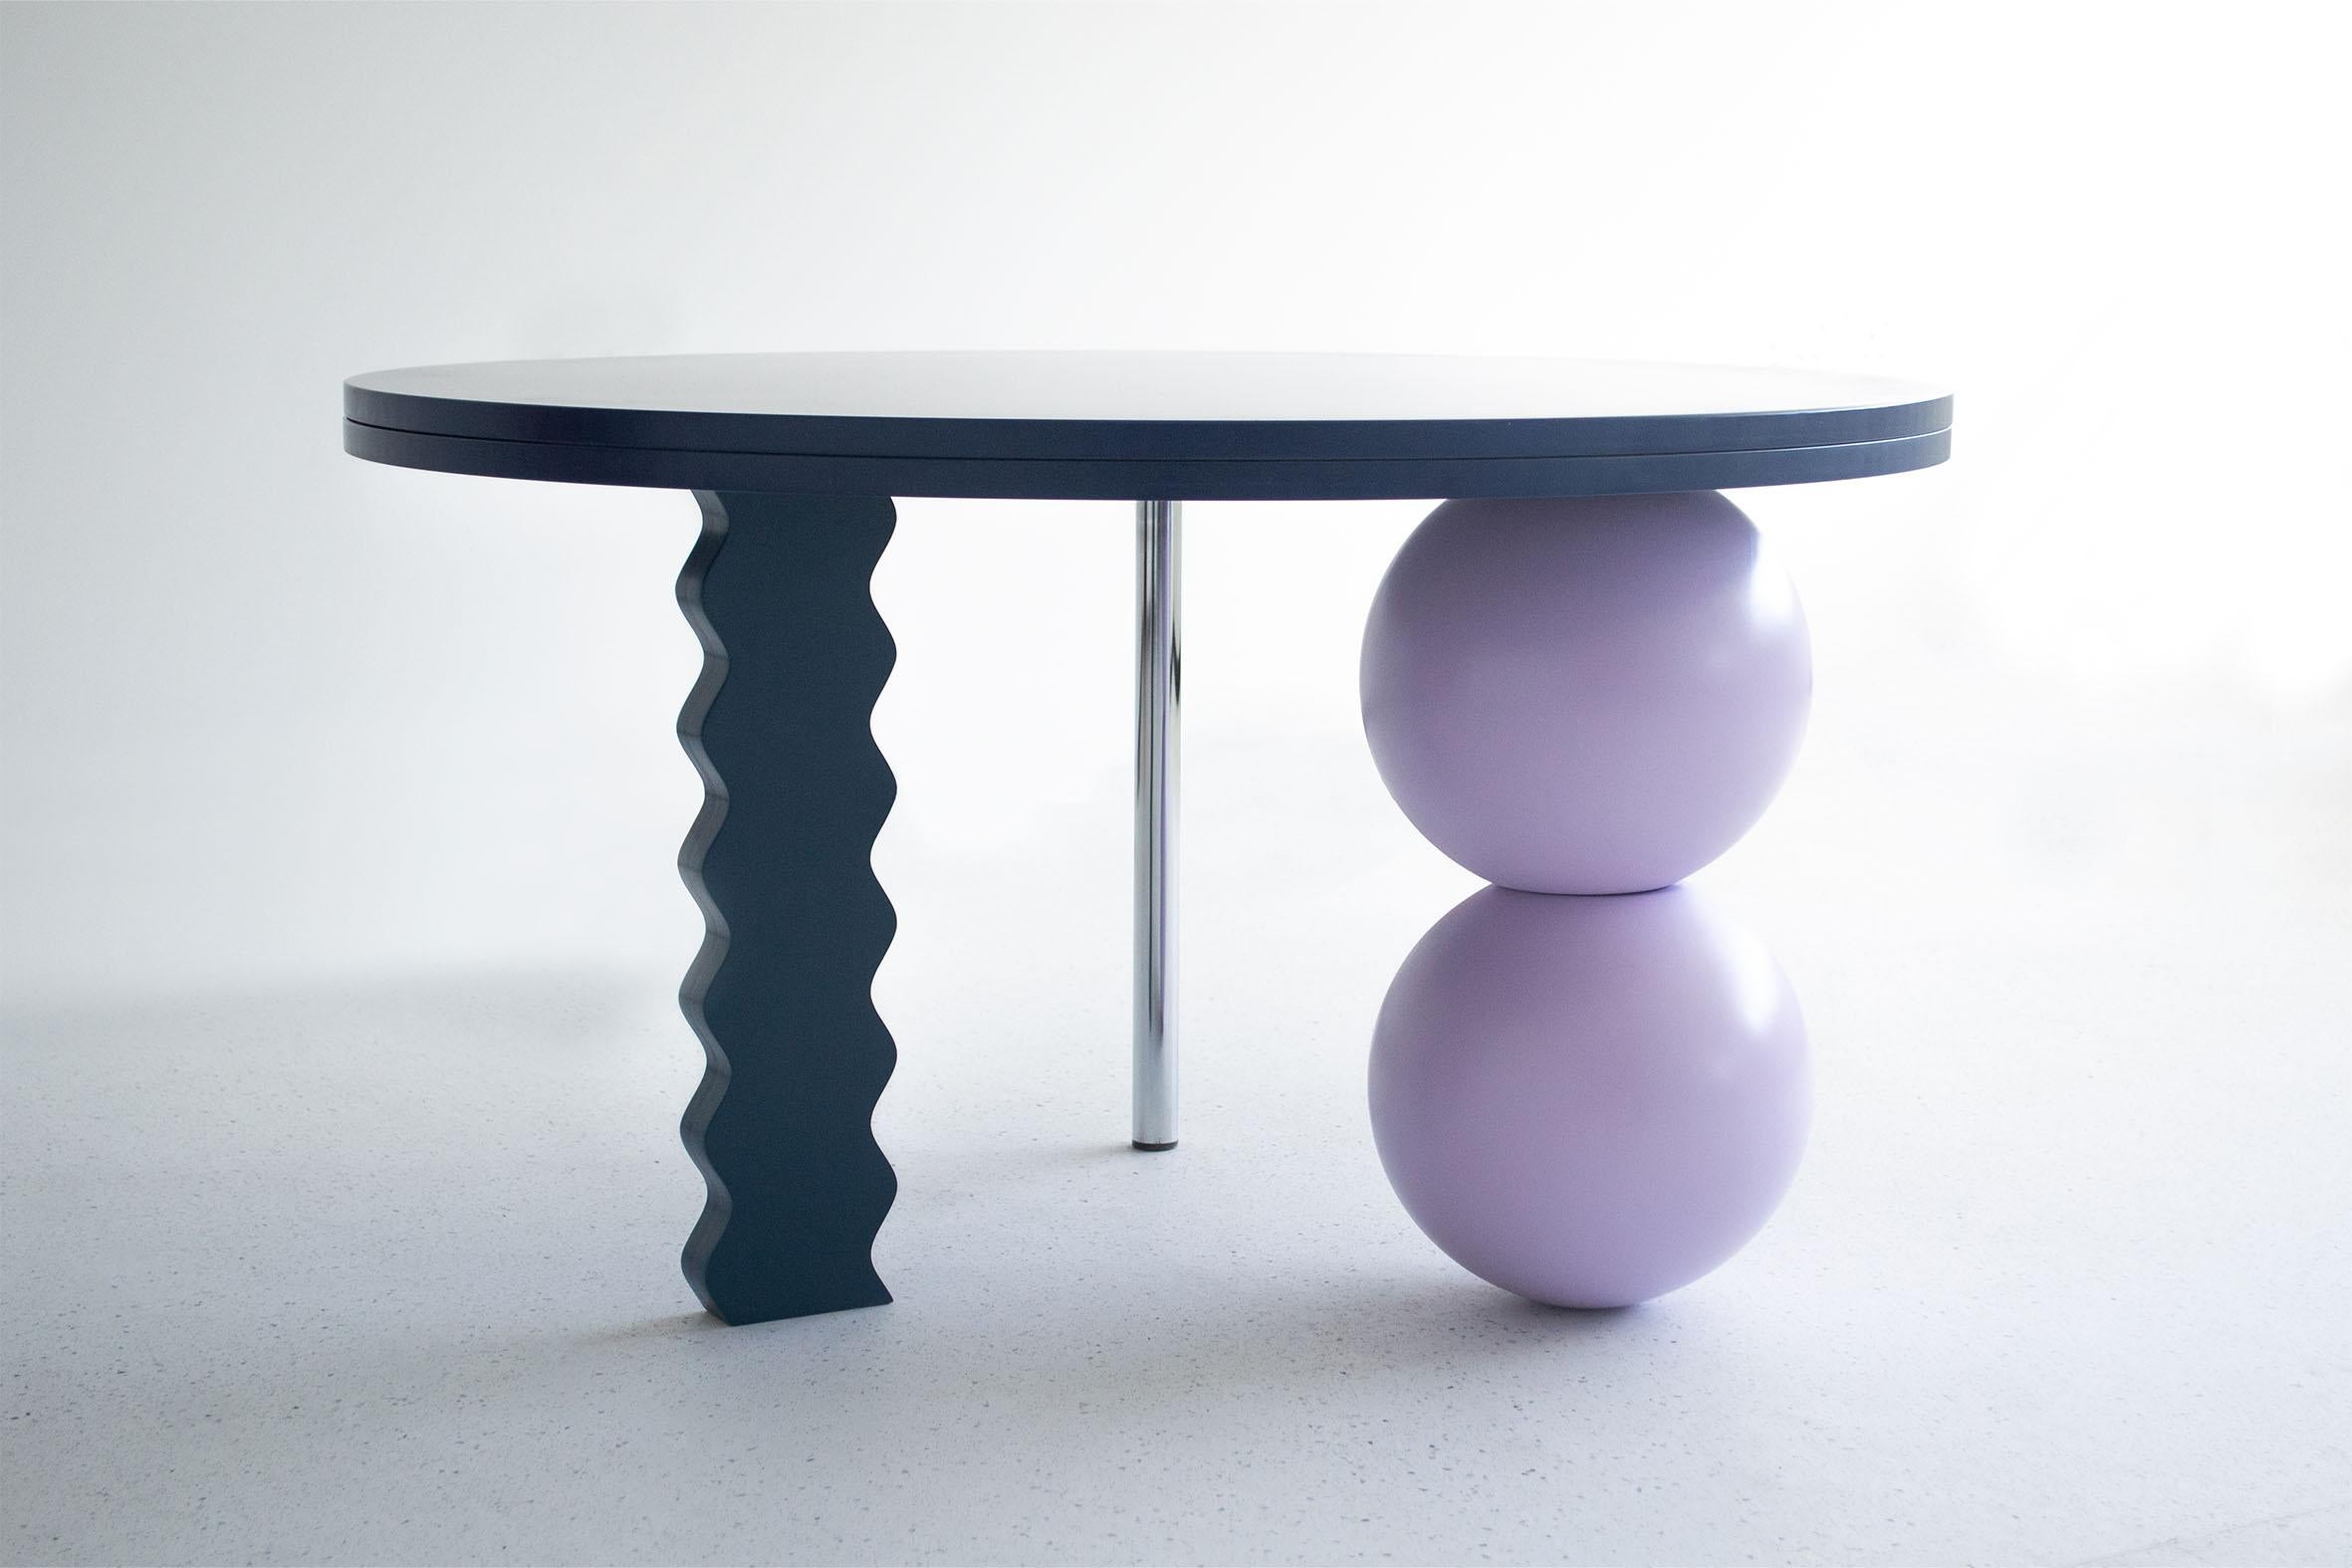 Sphere & wave side table by Studio Christinekalia
Dimensions: W 90 x D 90 x H 50 cm.
Materials: Swedish pine solid Wood, MDF, stainless steel. 

The bold design of this side table makes it a stand-out piece in the space. Combining the